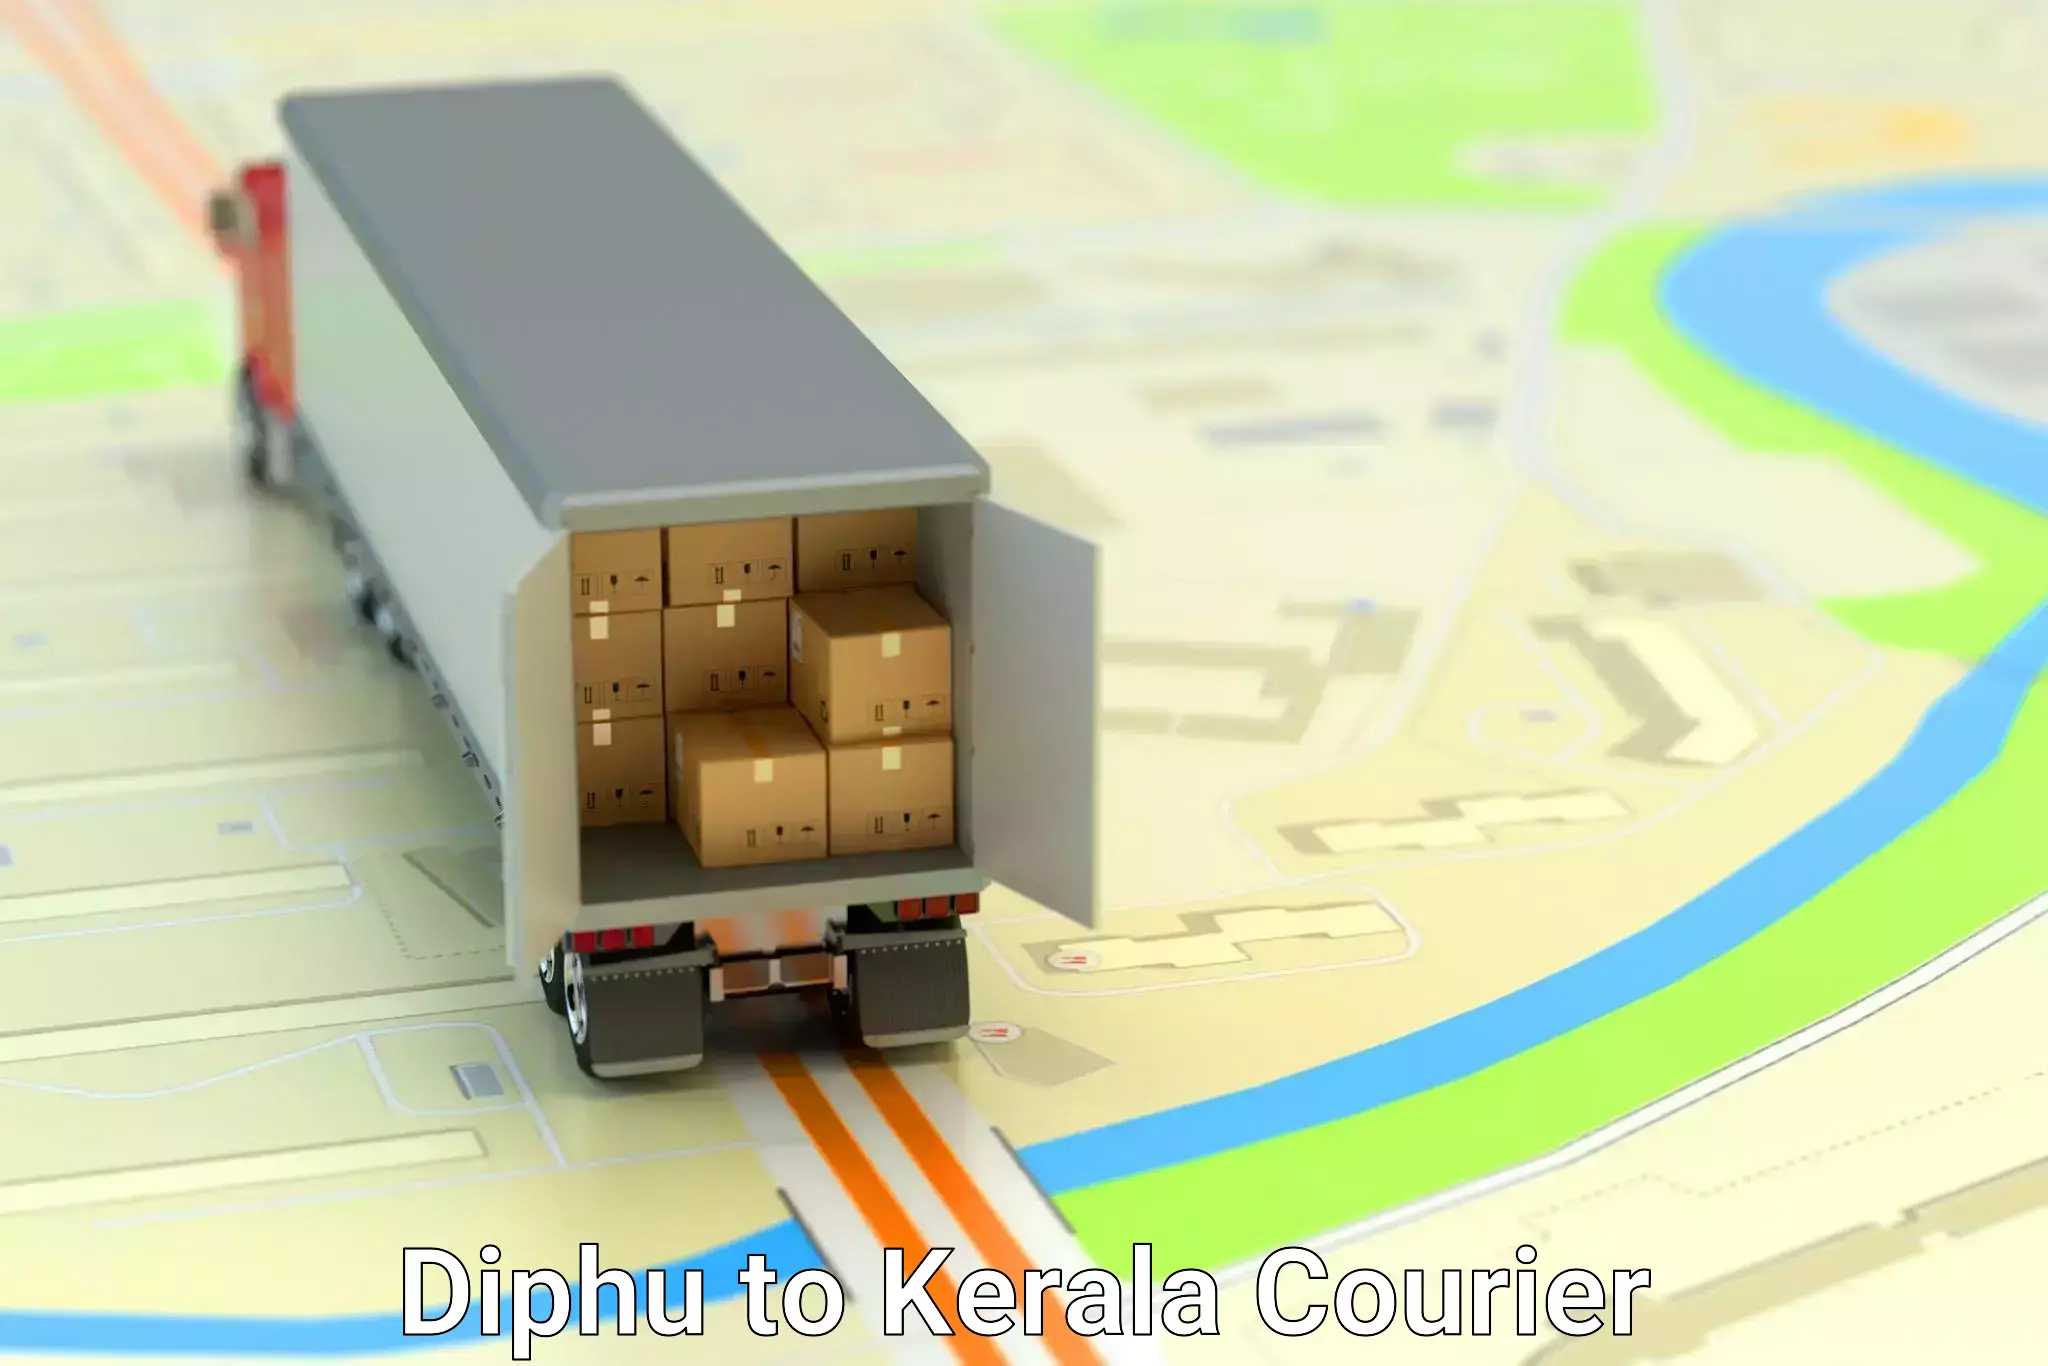 International courier networks Diphu to Kerala